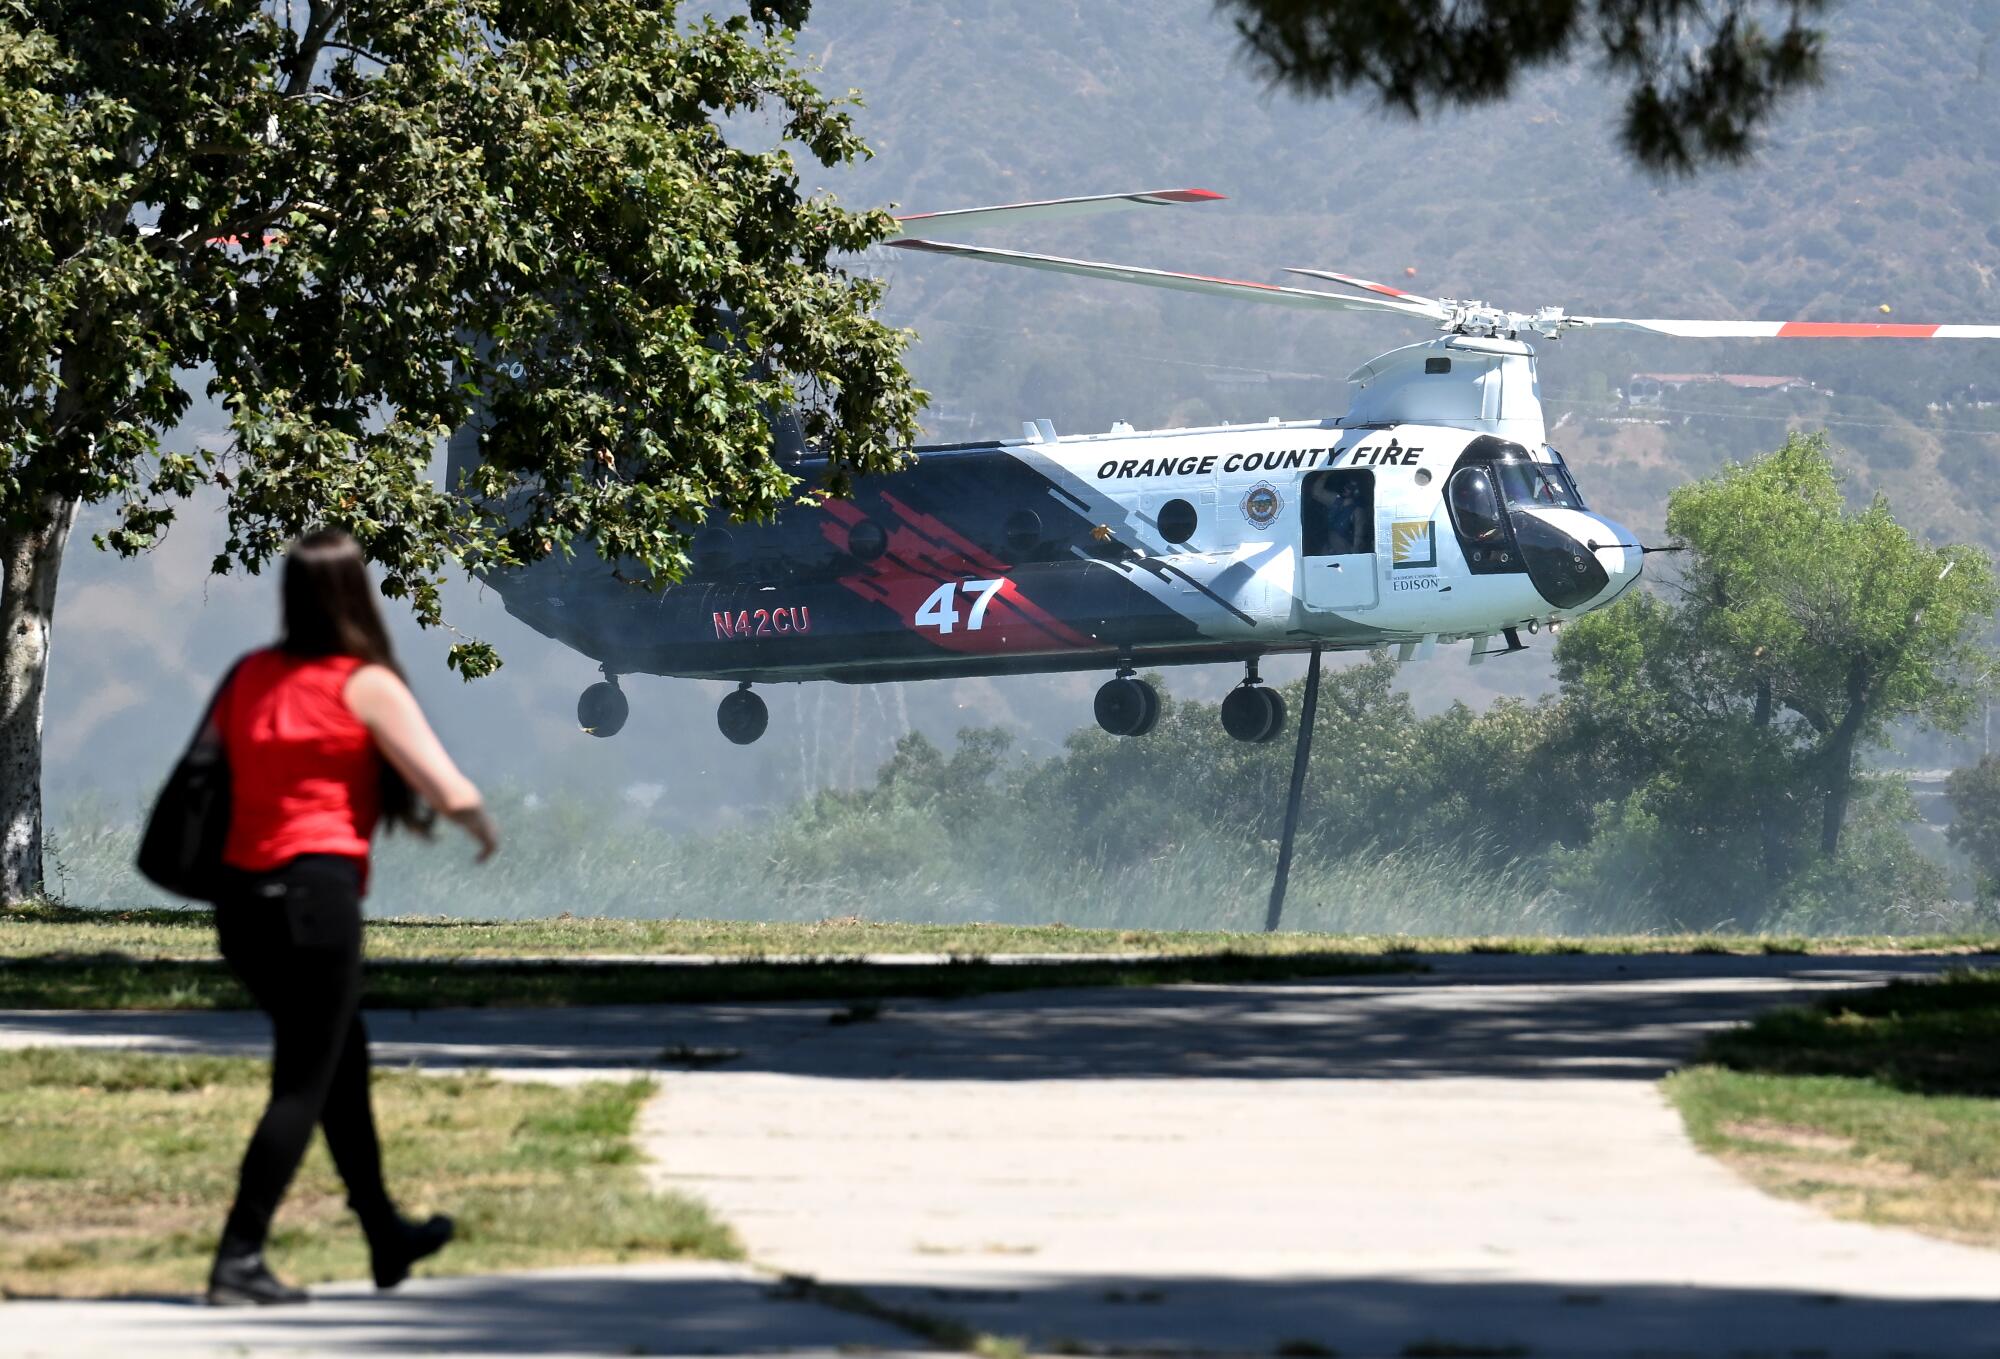 A firefighting helicopter hovers just above ground as a figure walks in the foreground.